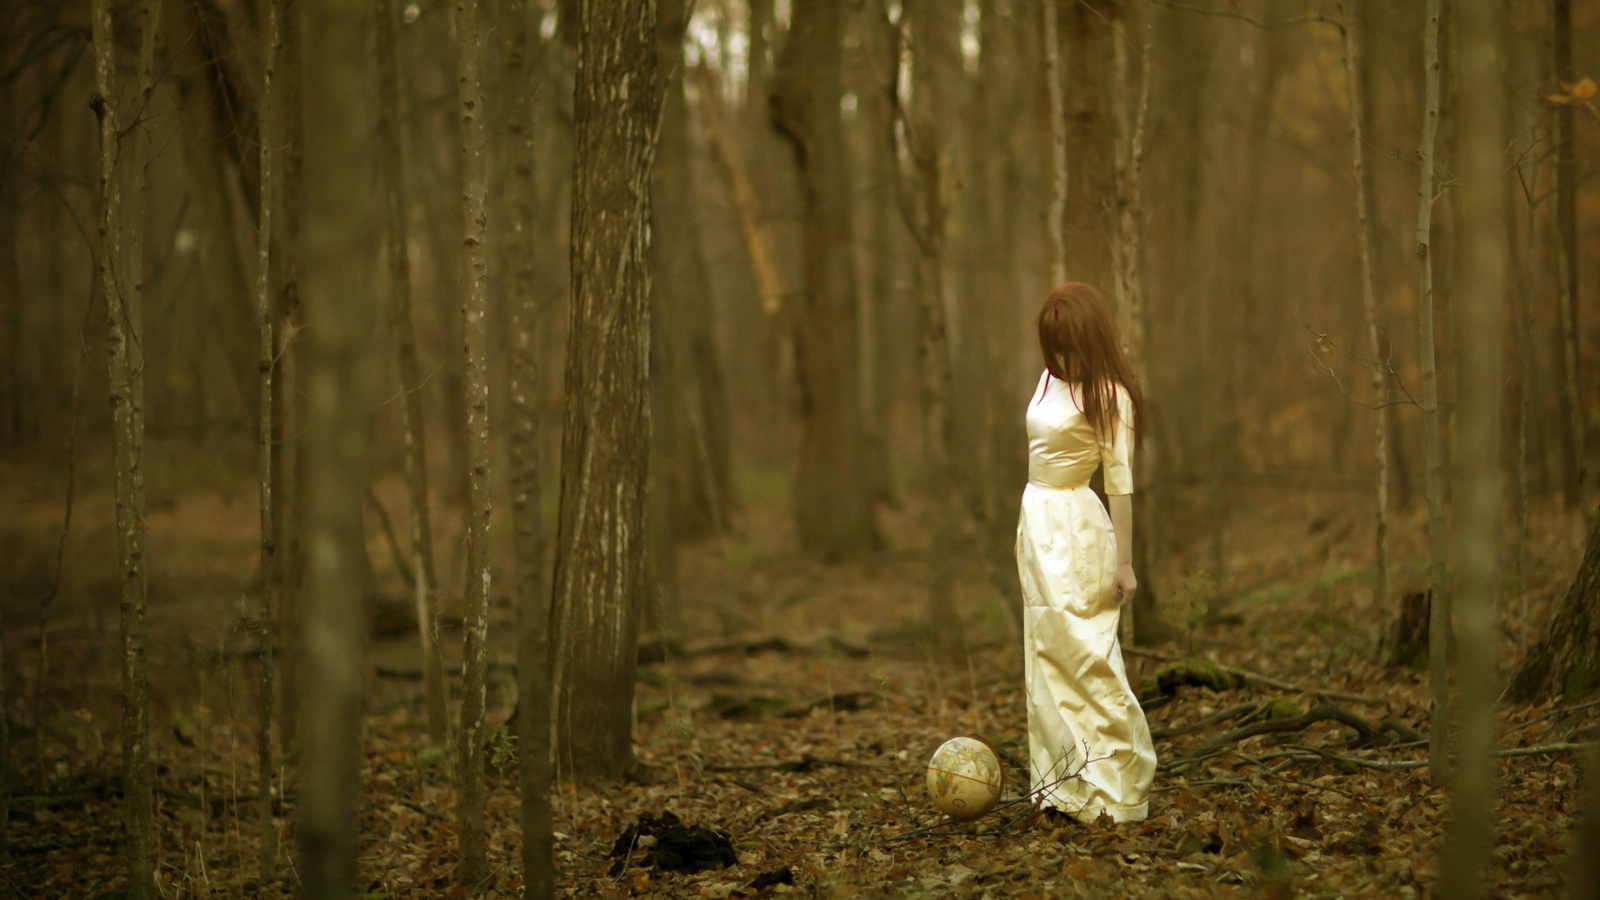 Girl And Globe In Forest wallpaper 1600x900